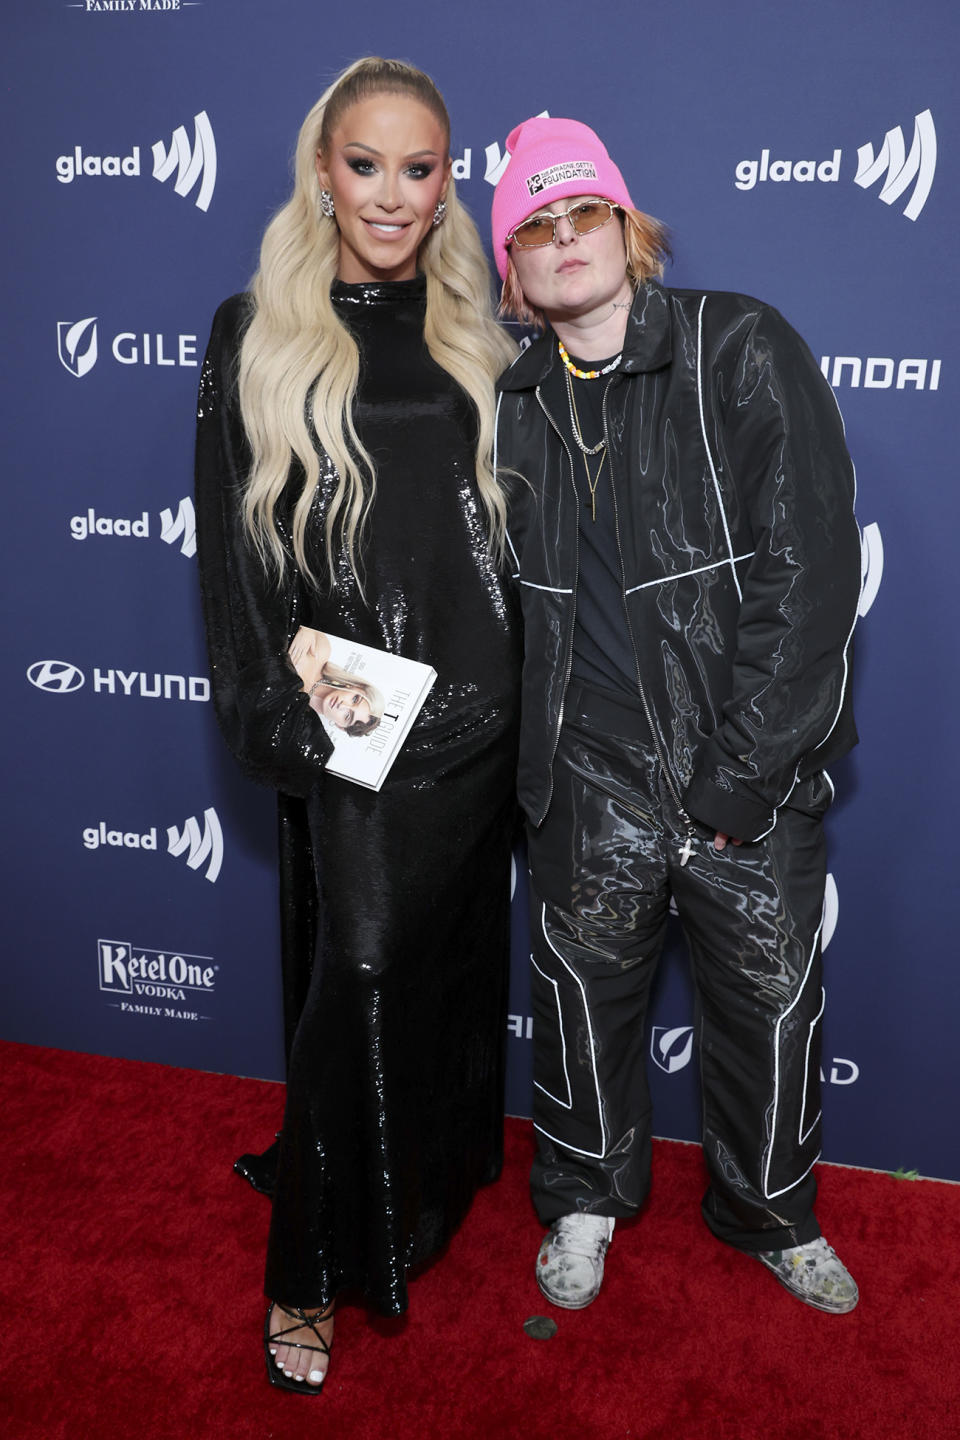 <p>BEVERLY HILLS, CALIFORNIA – MARCH 30: (L-R) Gigi Gorgeous and Nats Getty attend the GLAAD Media Awards at The Beverly Hilton on March 30, 2023 in Beverly Hills, California. (Photo by Randy Shropshire/Getty Images for GLAAD)</p>